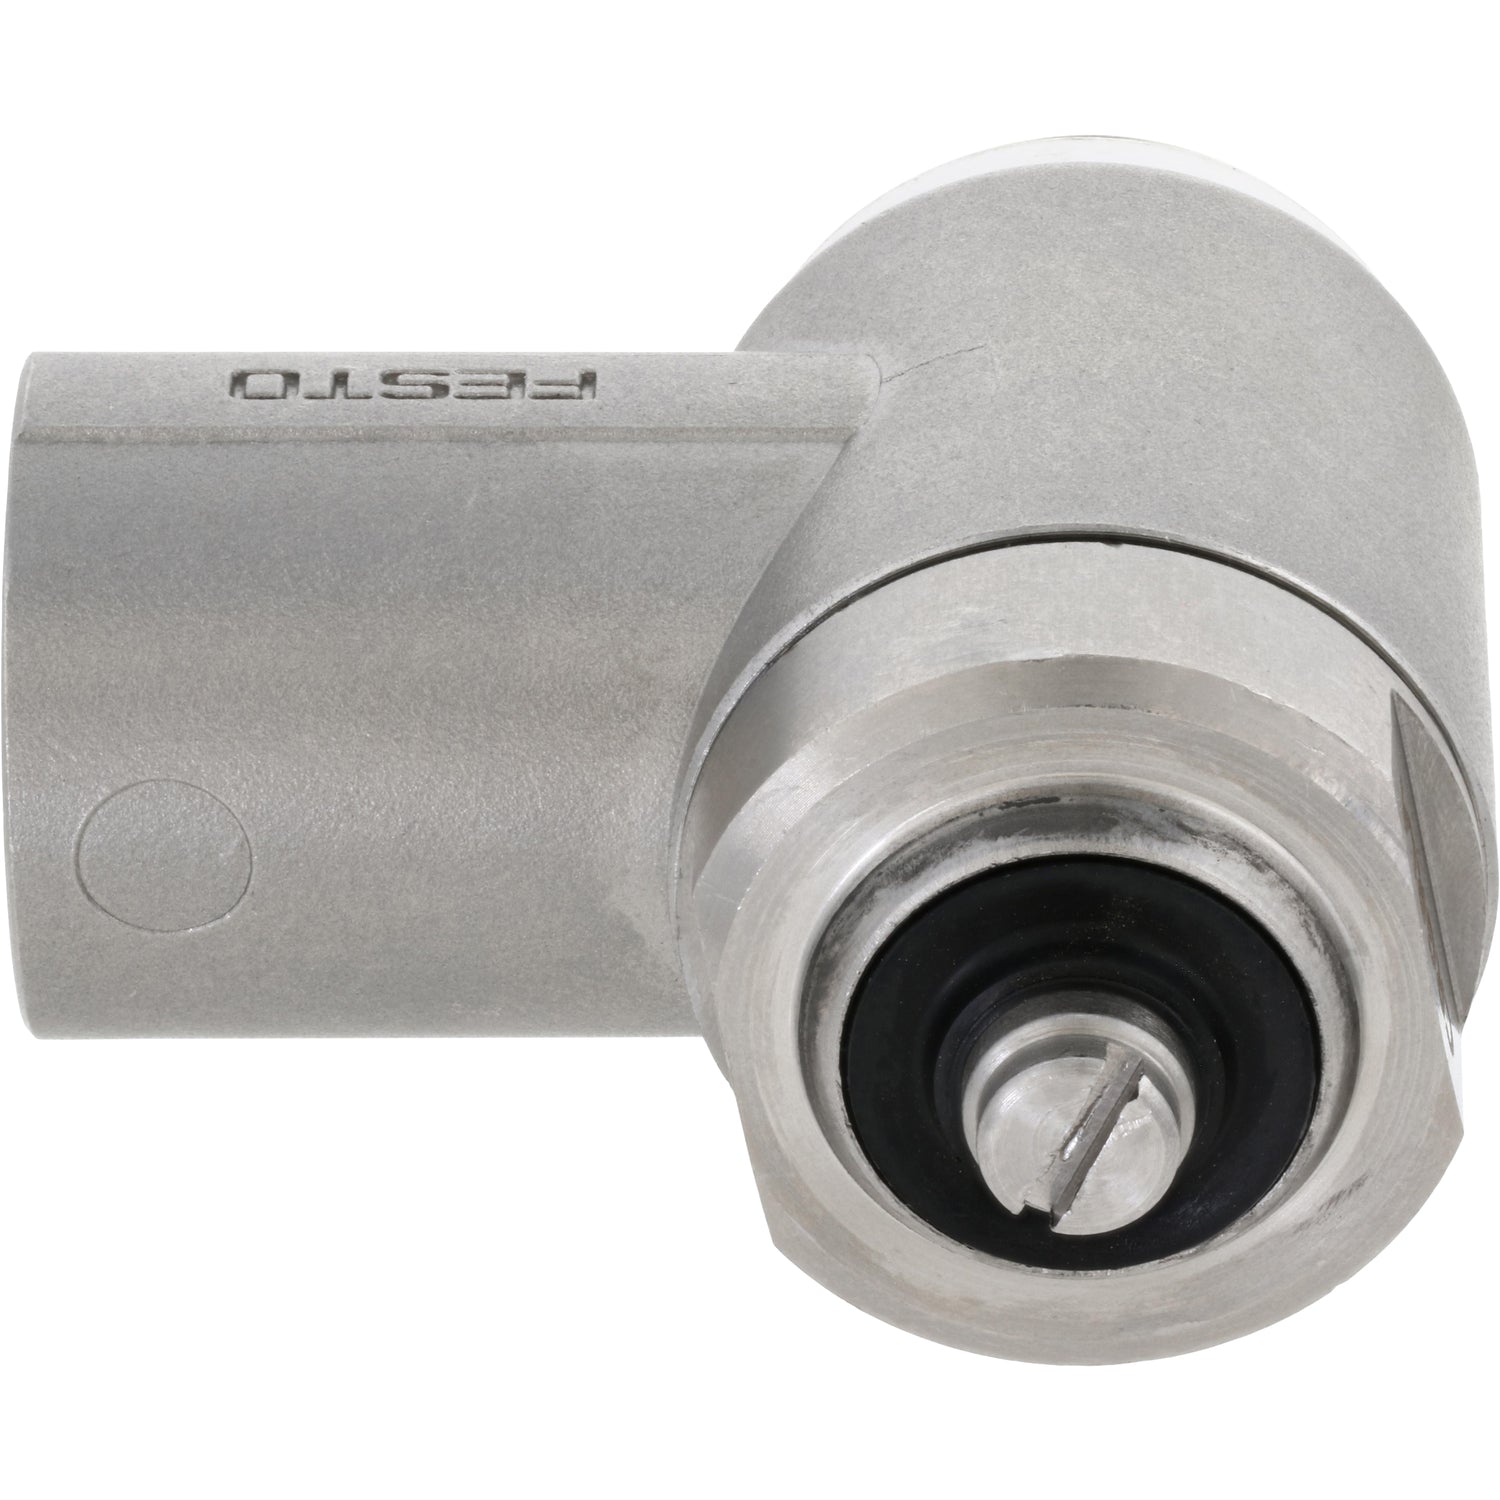 Stainless steel one-way flow control valve on white background. 